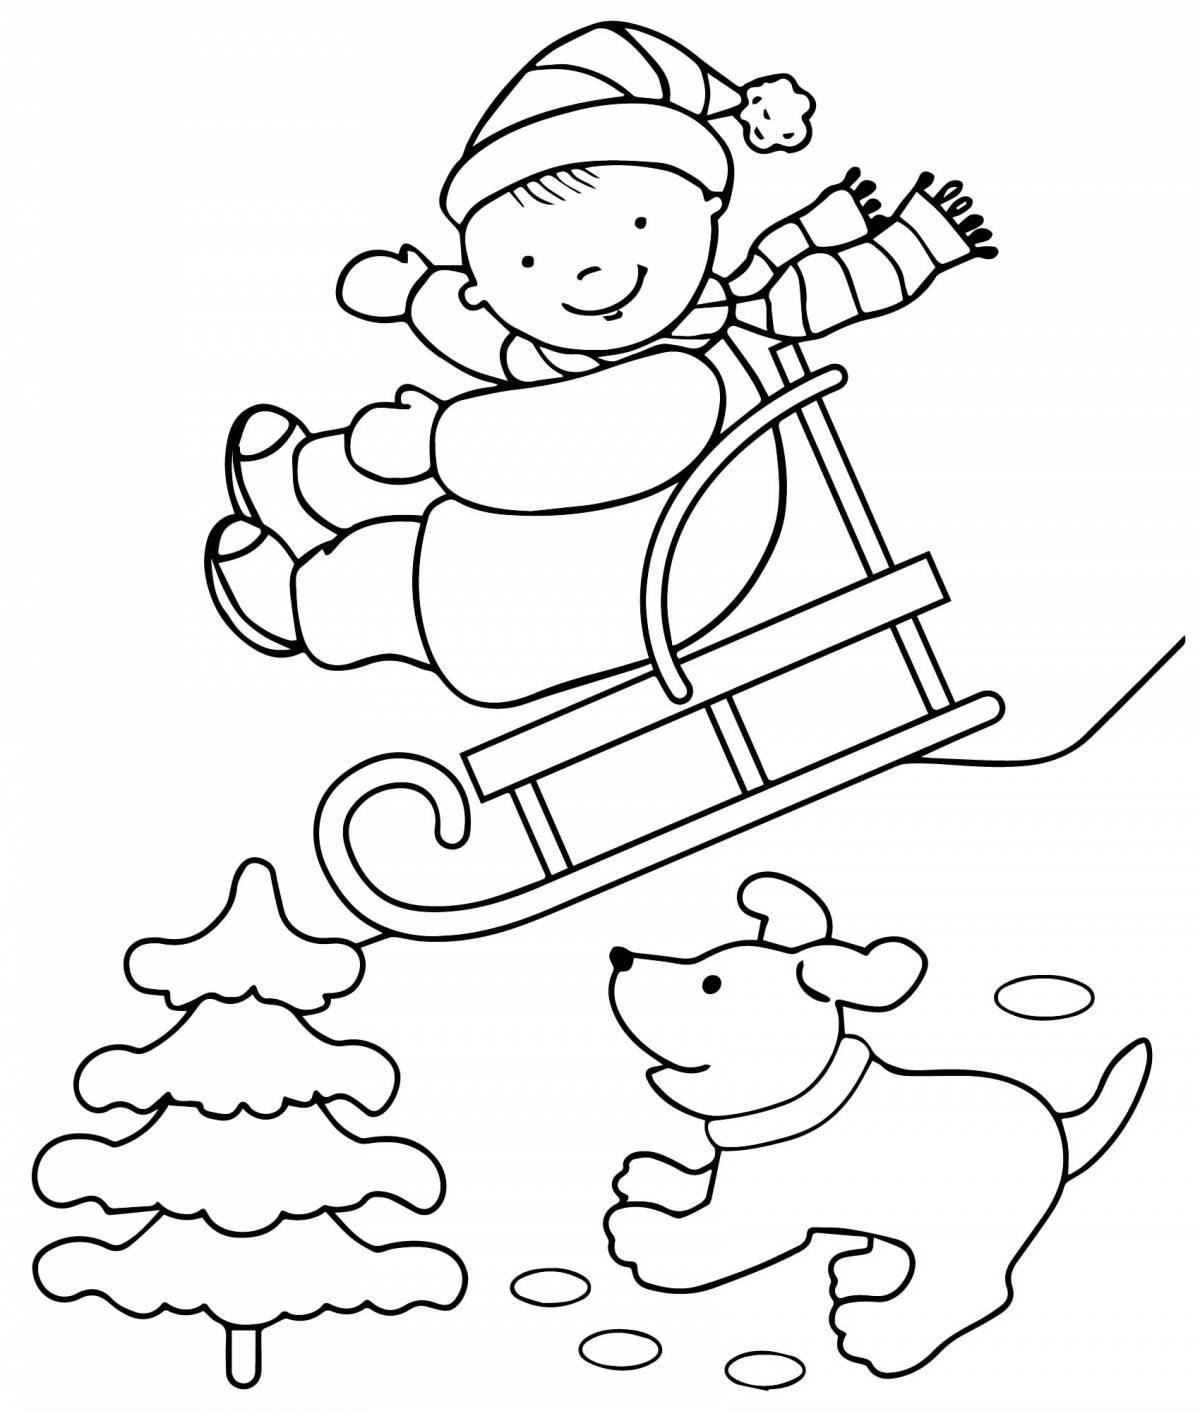 Glowing coloring book for children 3-4 years old winter